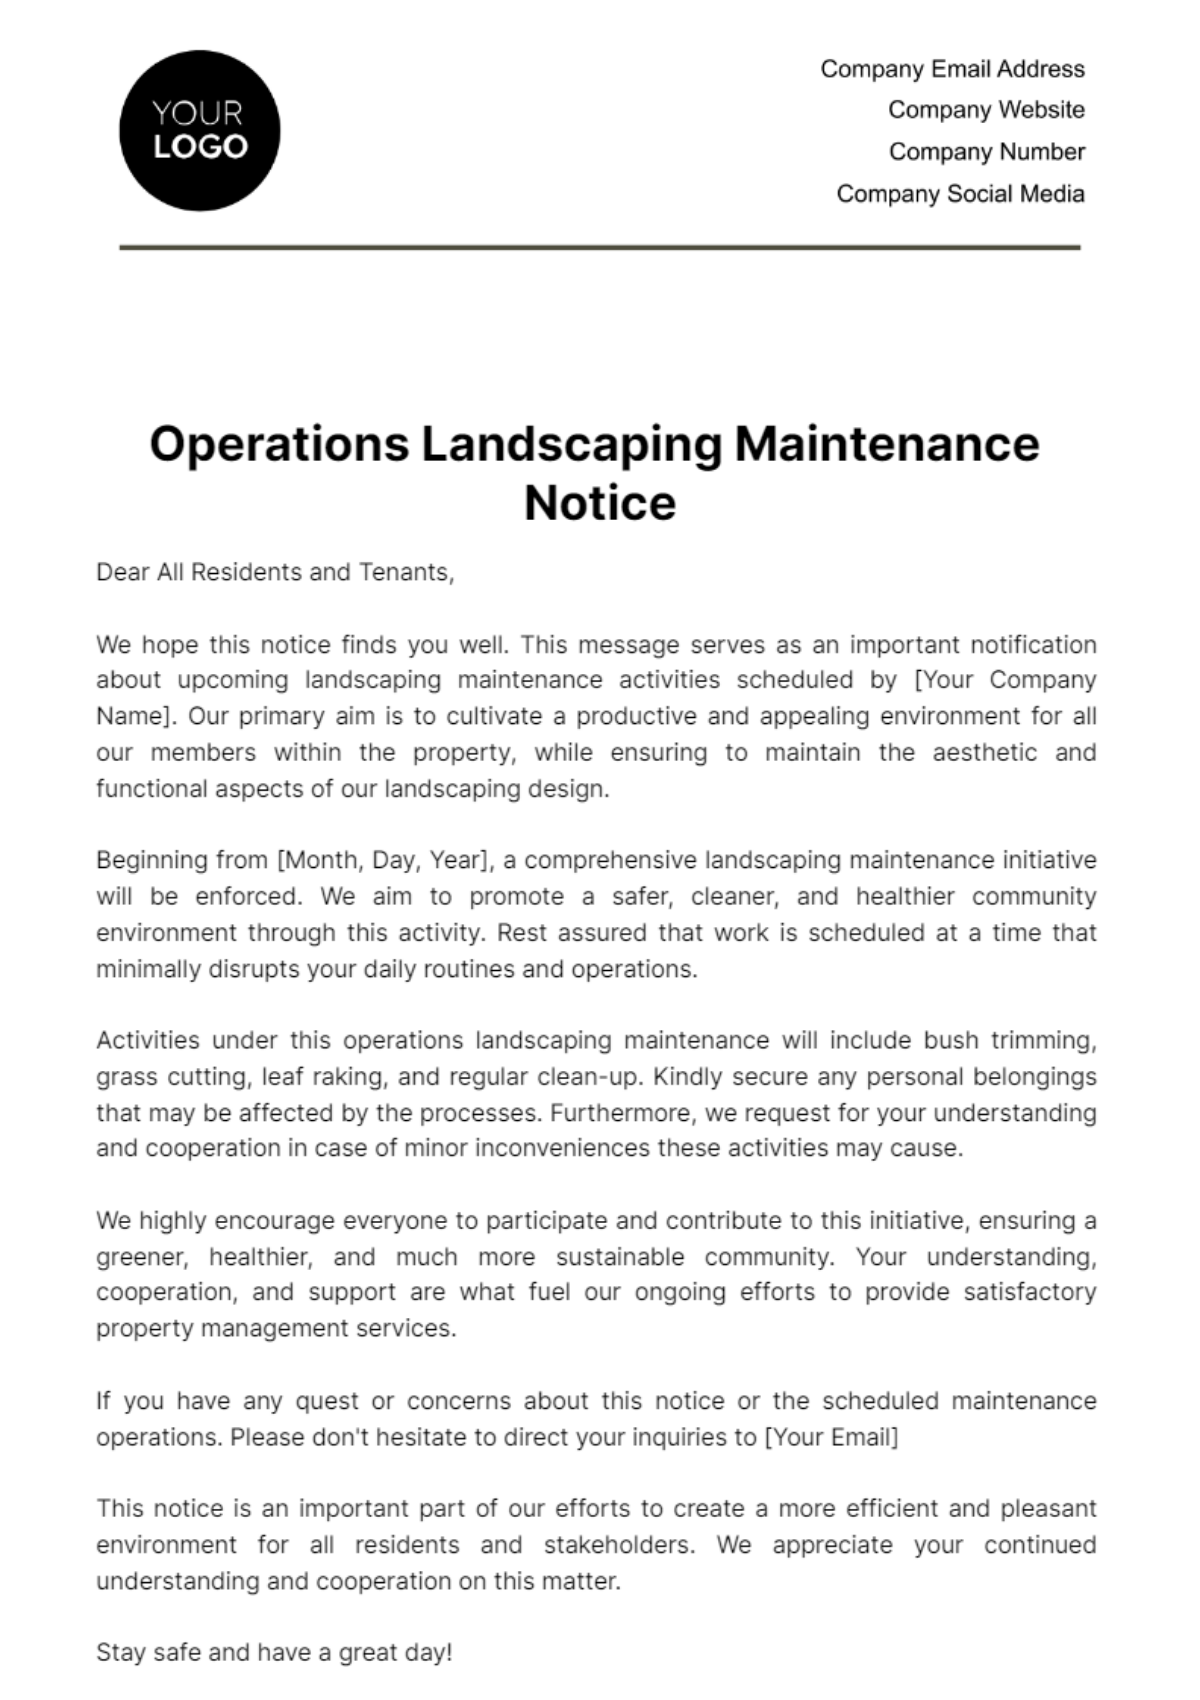 Operations Landscaping Maintenance Notice Template